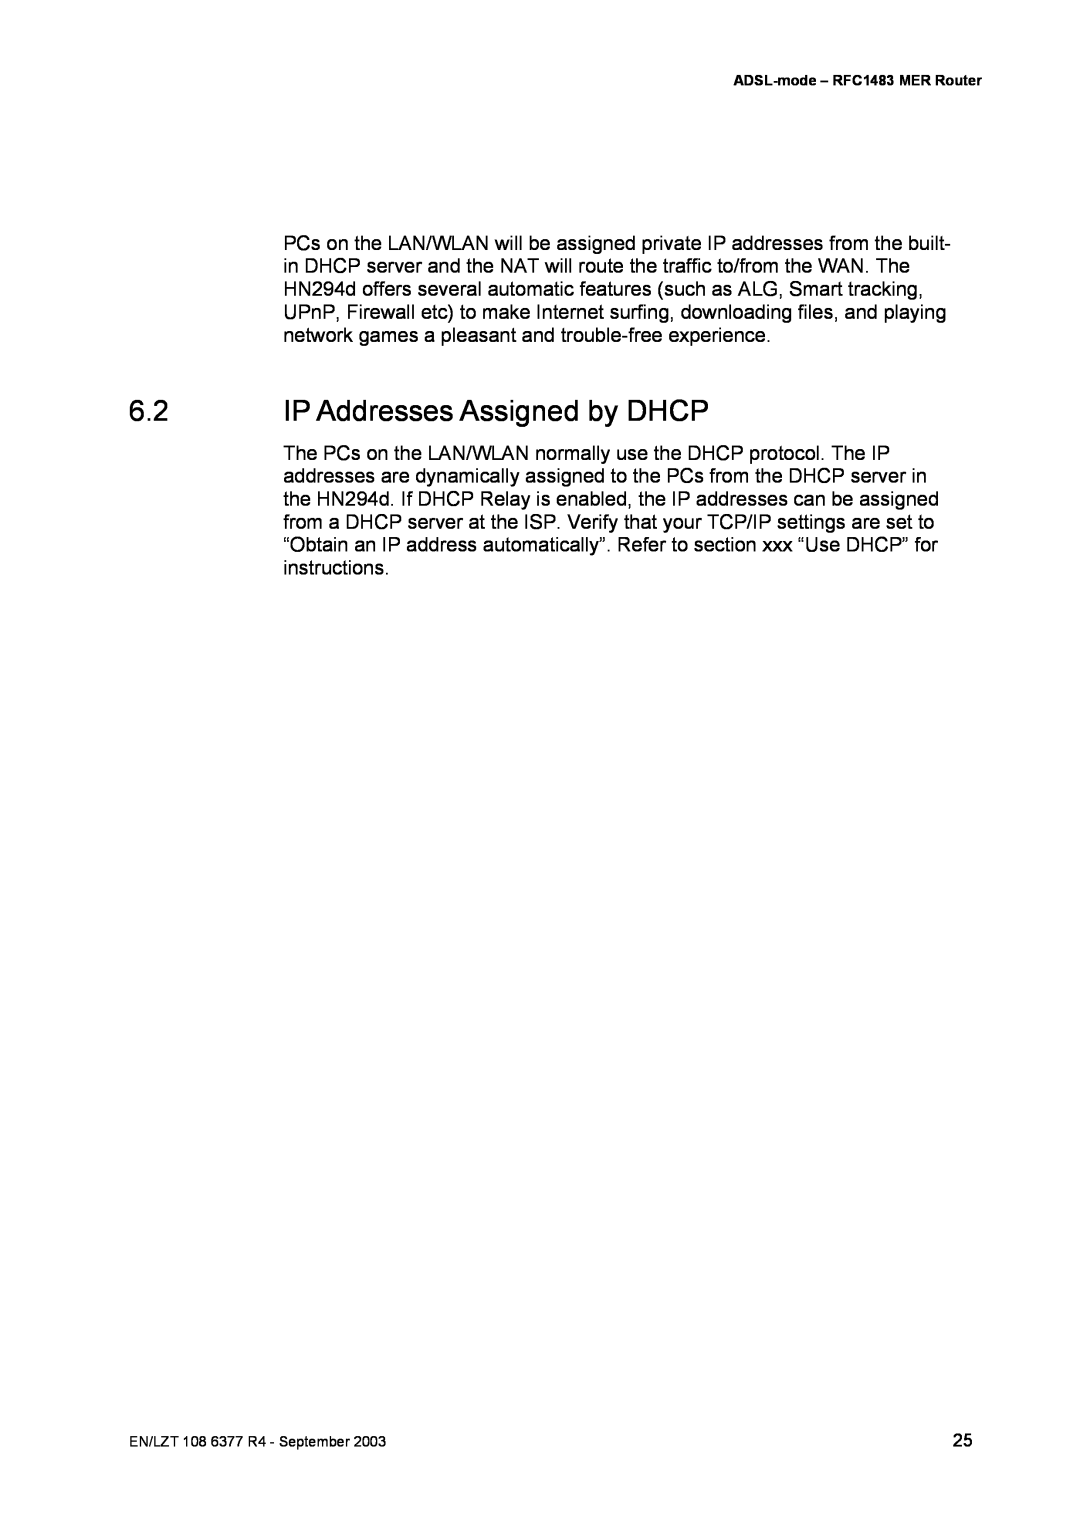 Garmin HN294DP/DI manual IP Addresses Assigned by DHCP 